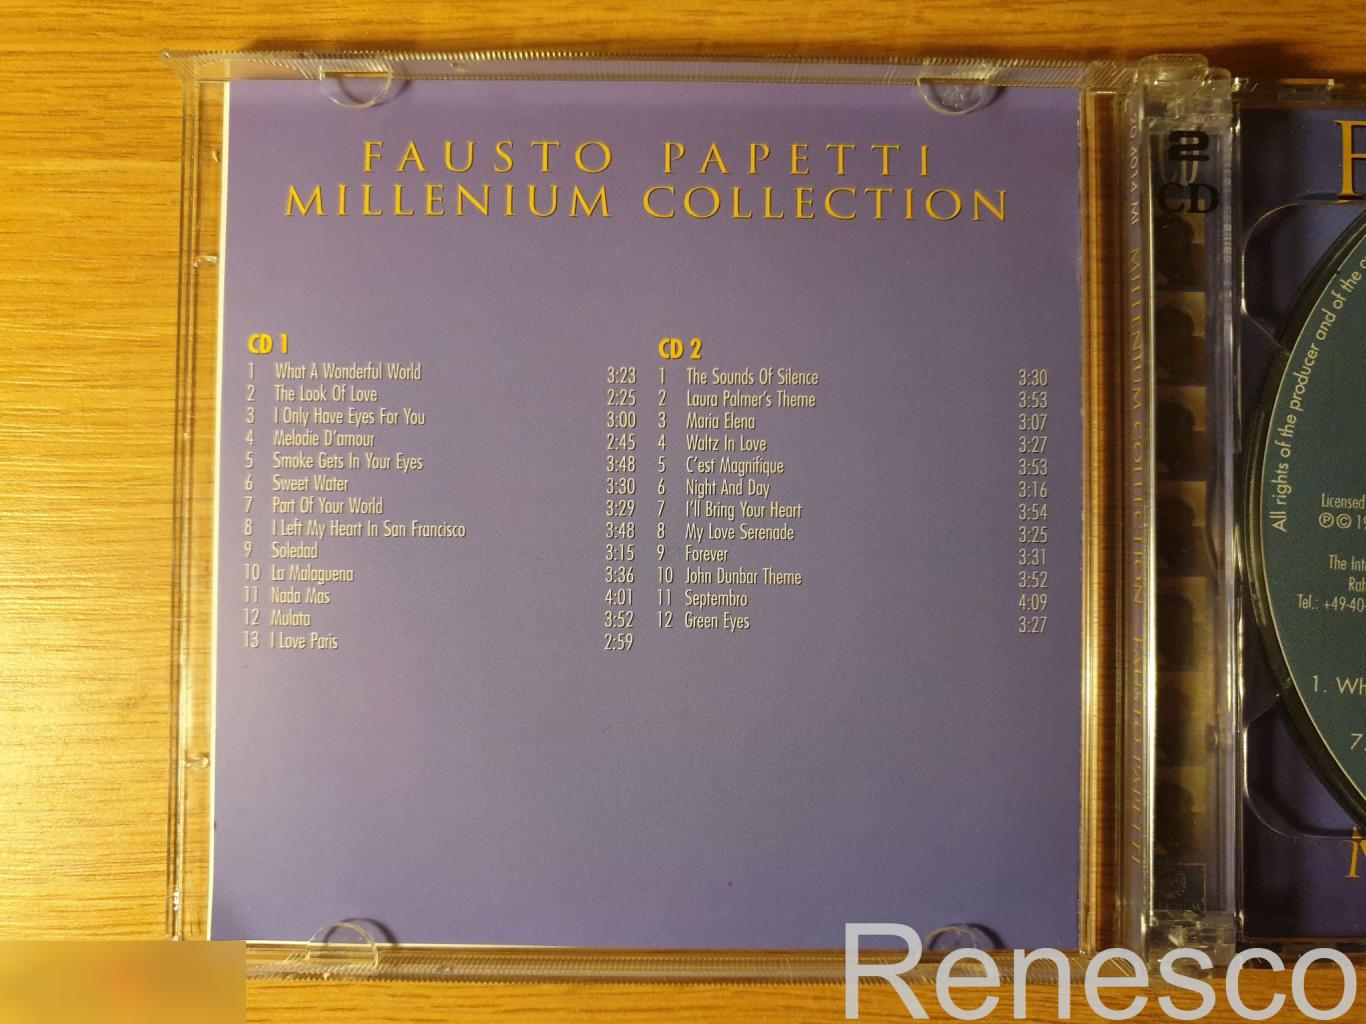 (2CD) Fausto Papetti - Millenium Collection (1999) (Germany) 3